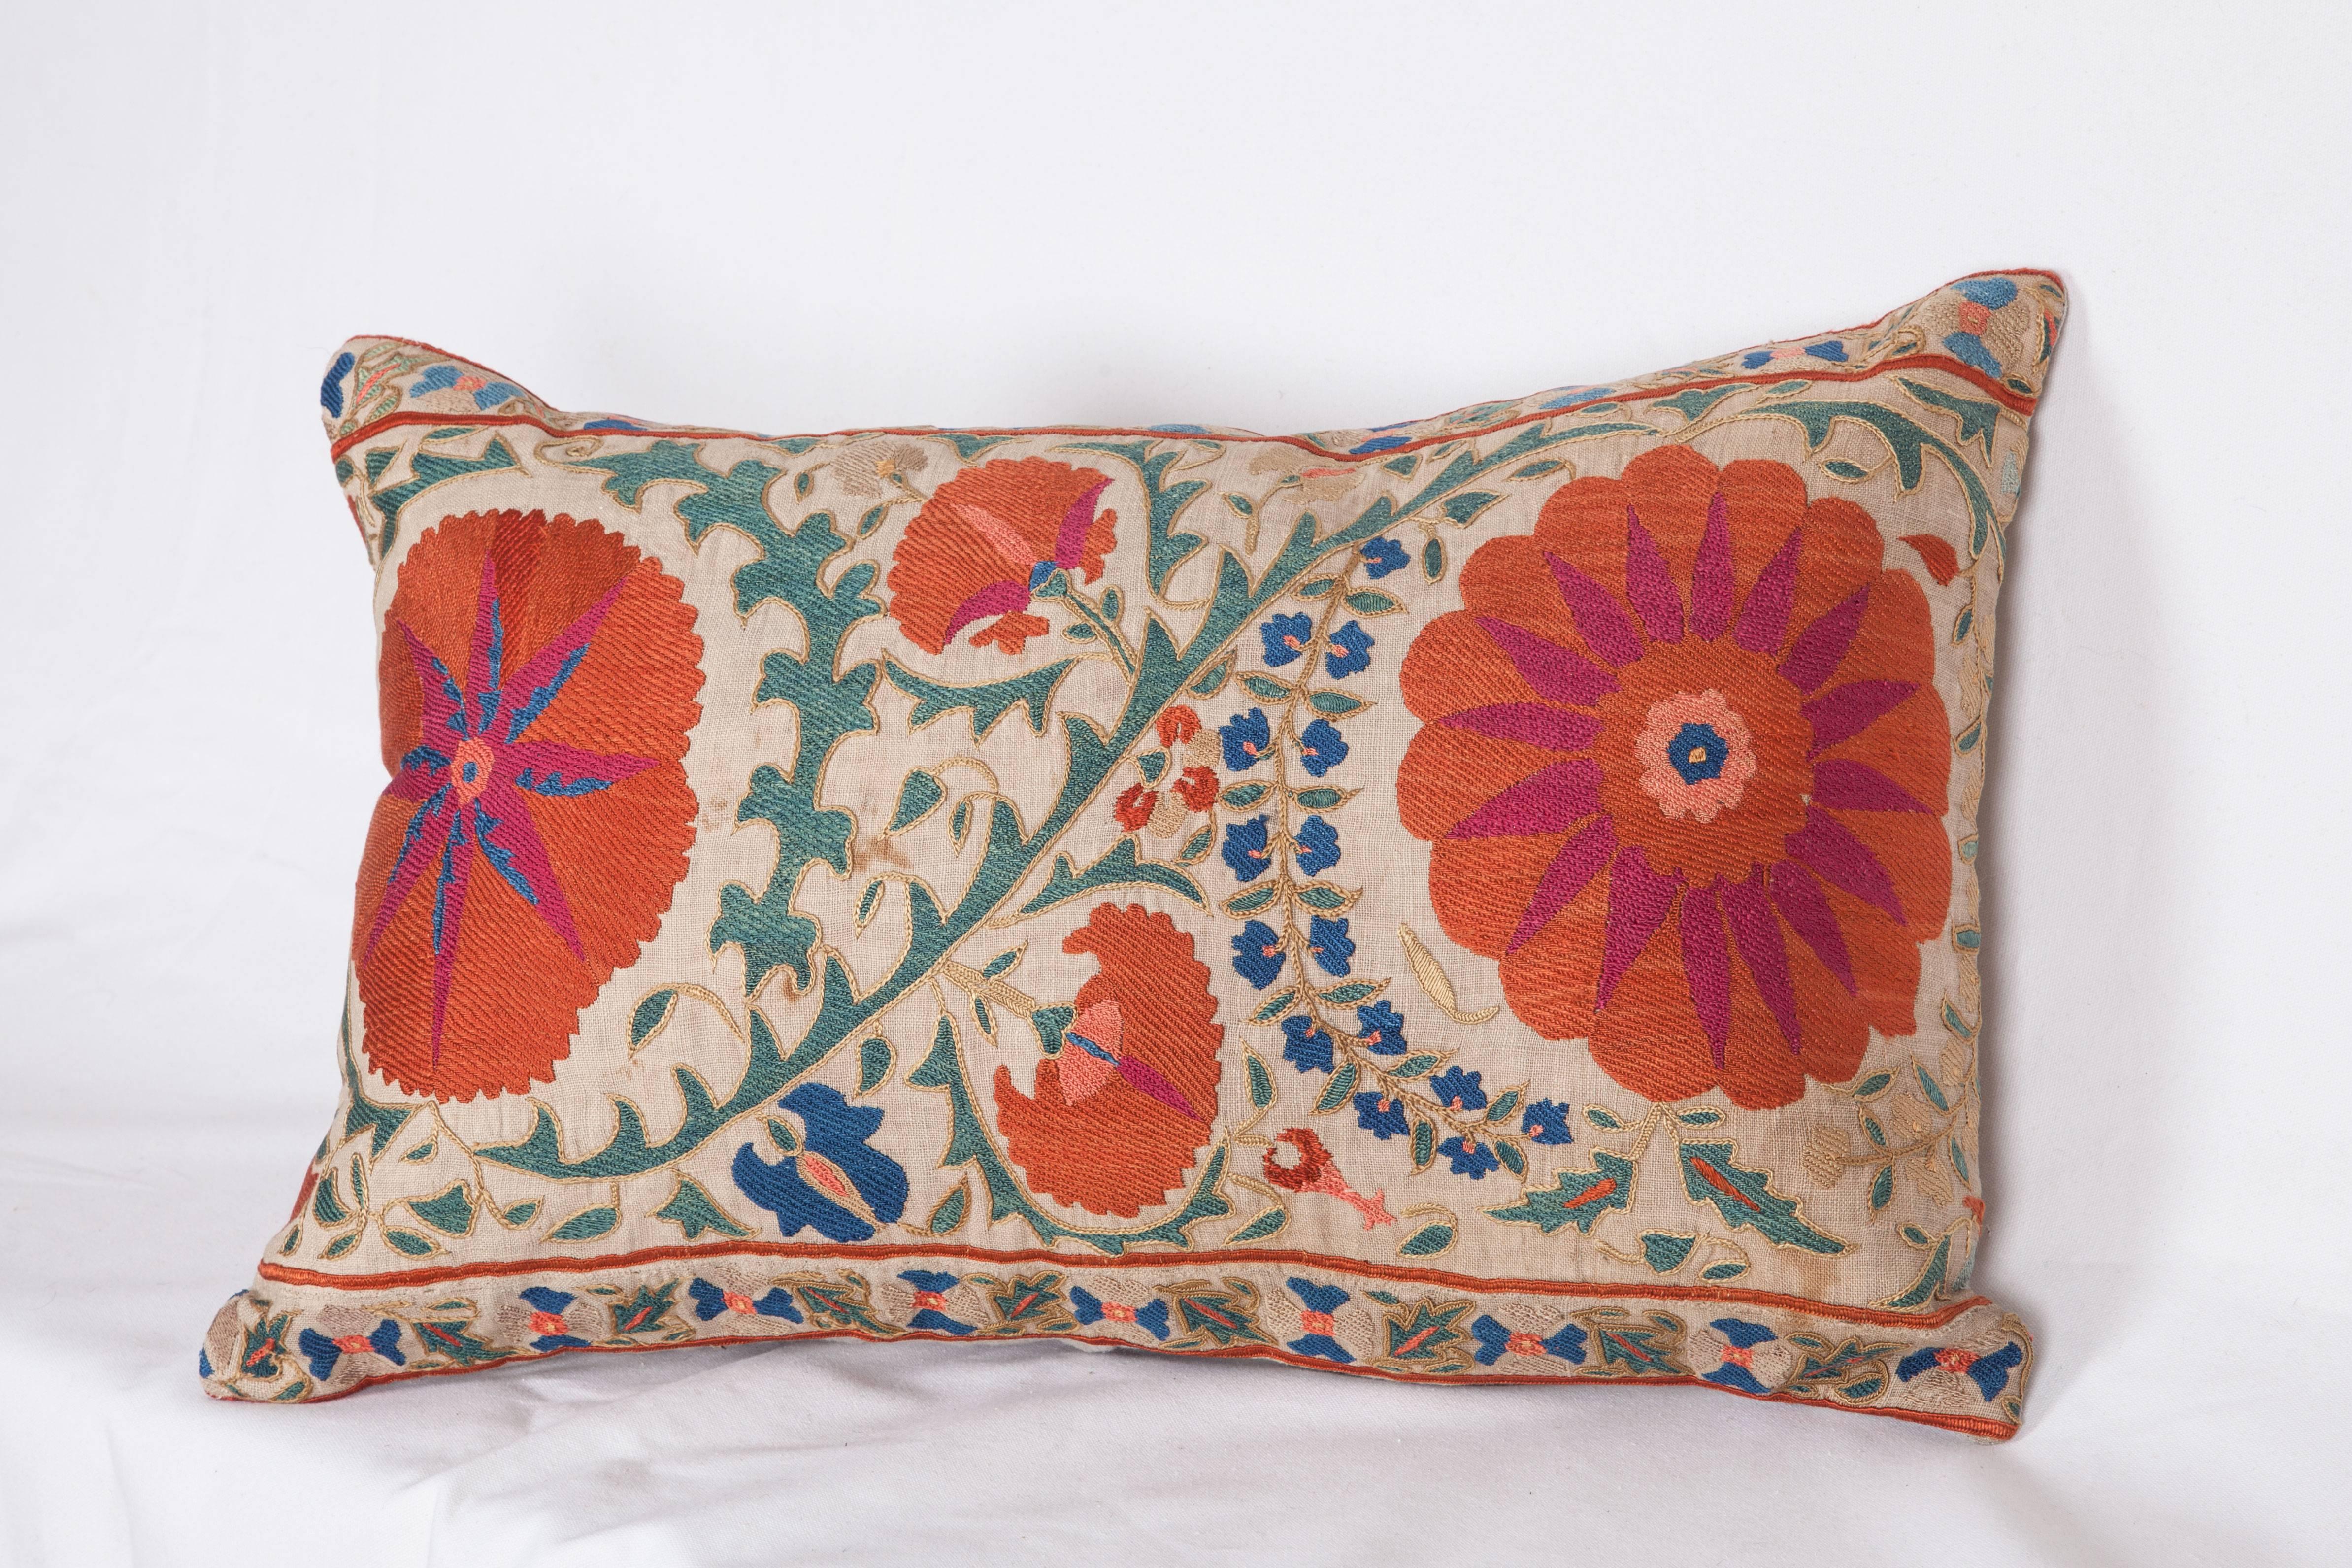 Antique Pillow Made Out of a Mid-19th Century, Uzbek Bukhara Suzani 1